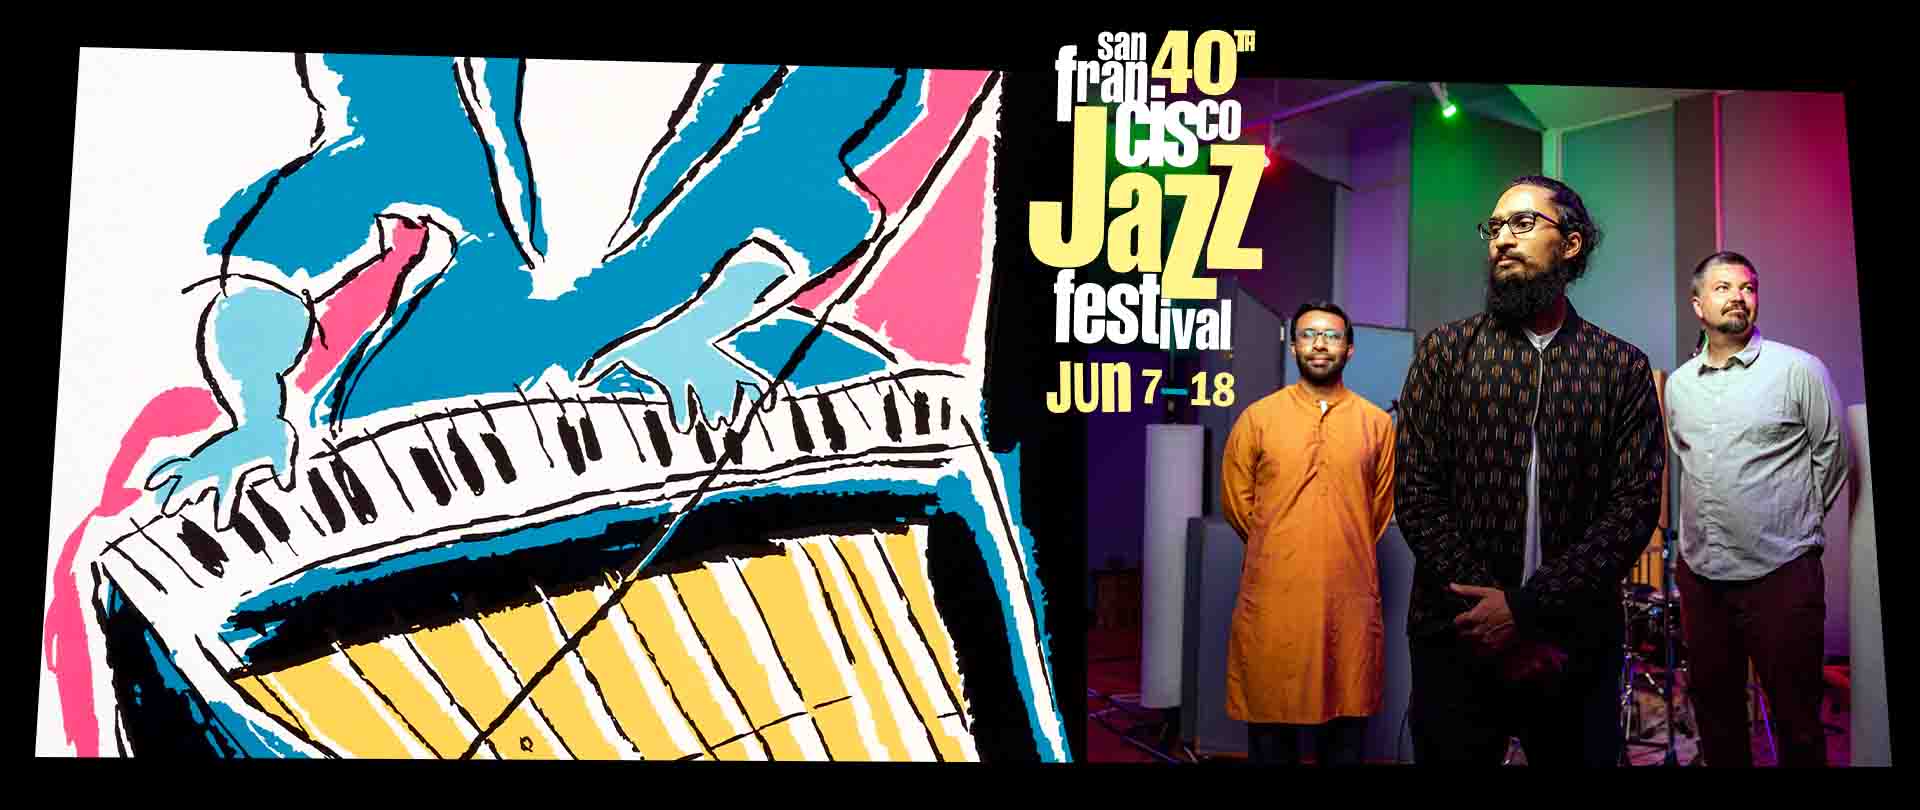 Group photo of the Alaya Project with the 40th San Francisco Jazz Festival artwork